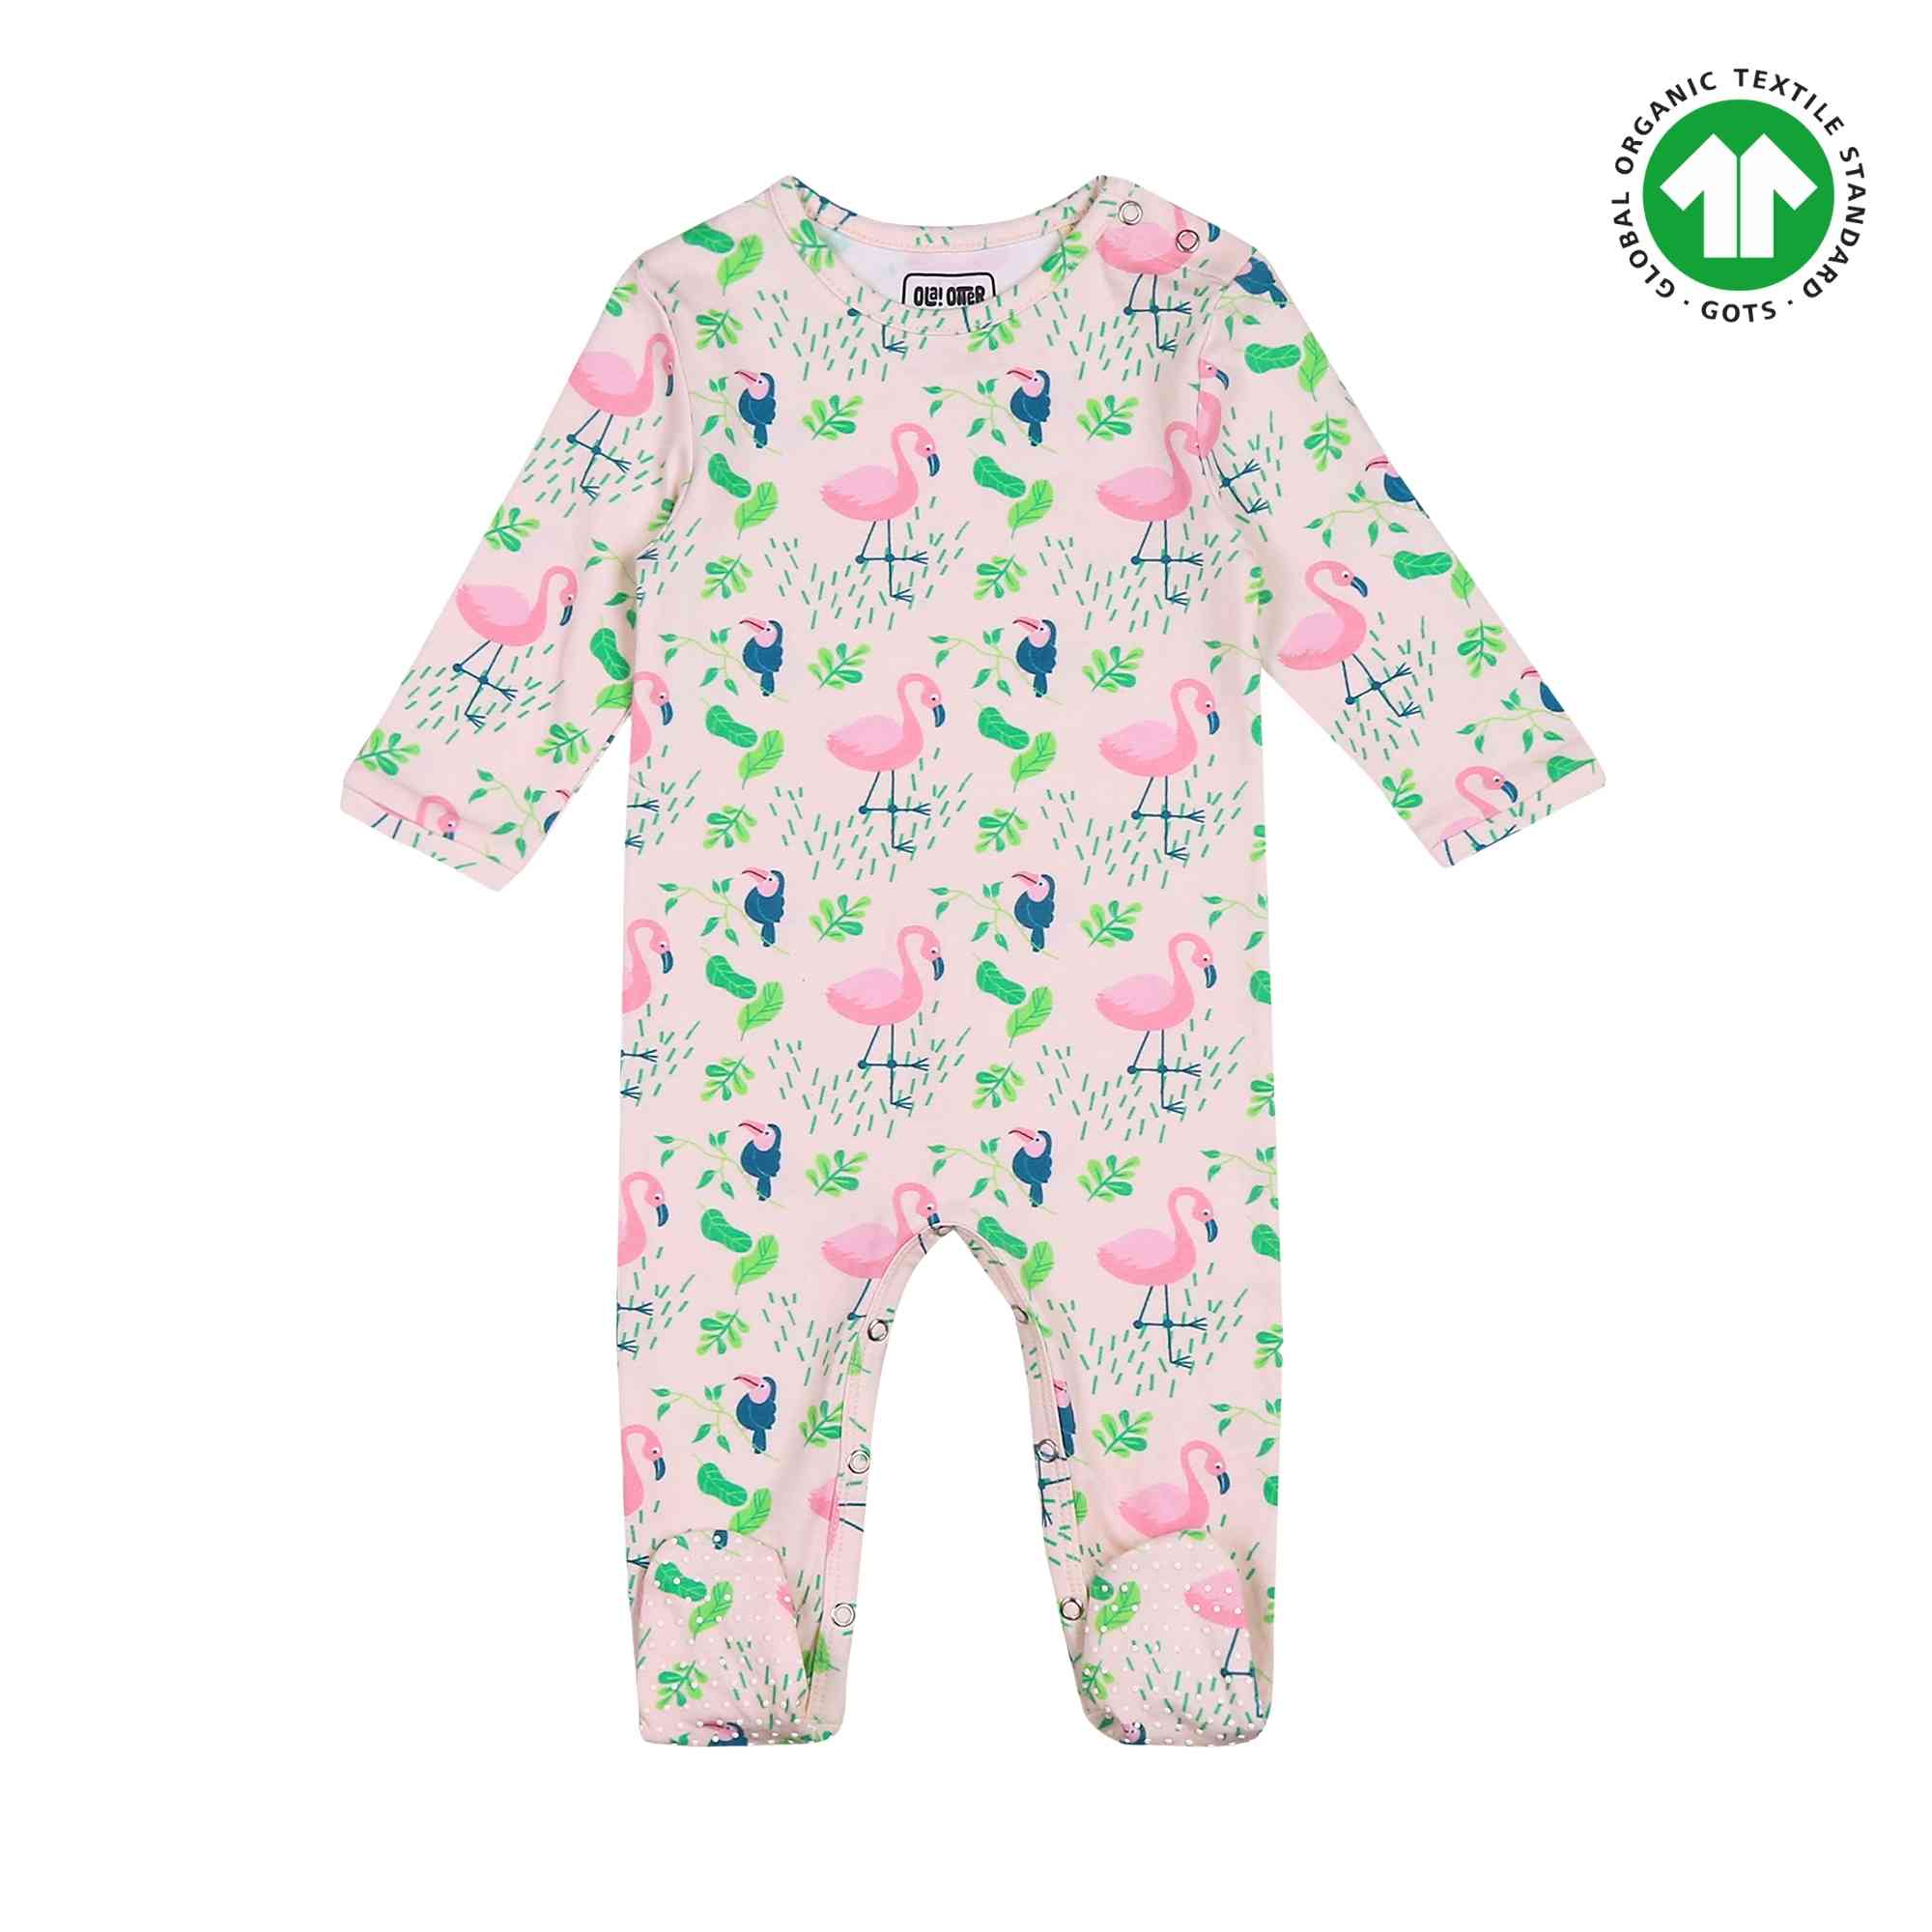 Sleepsuits for Babies